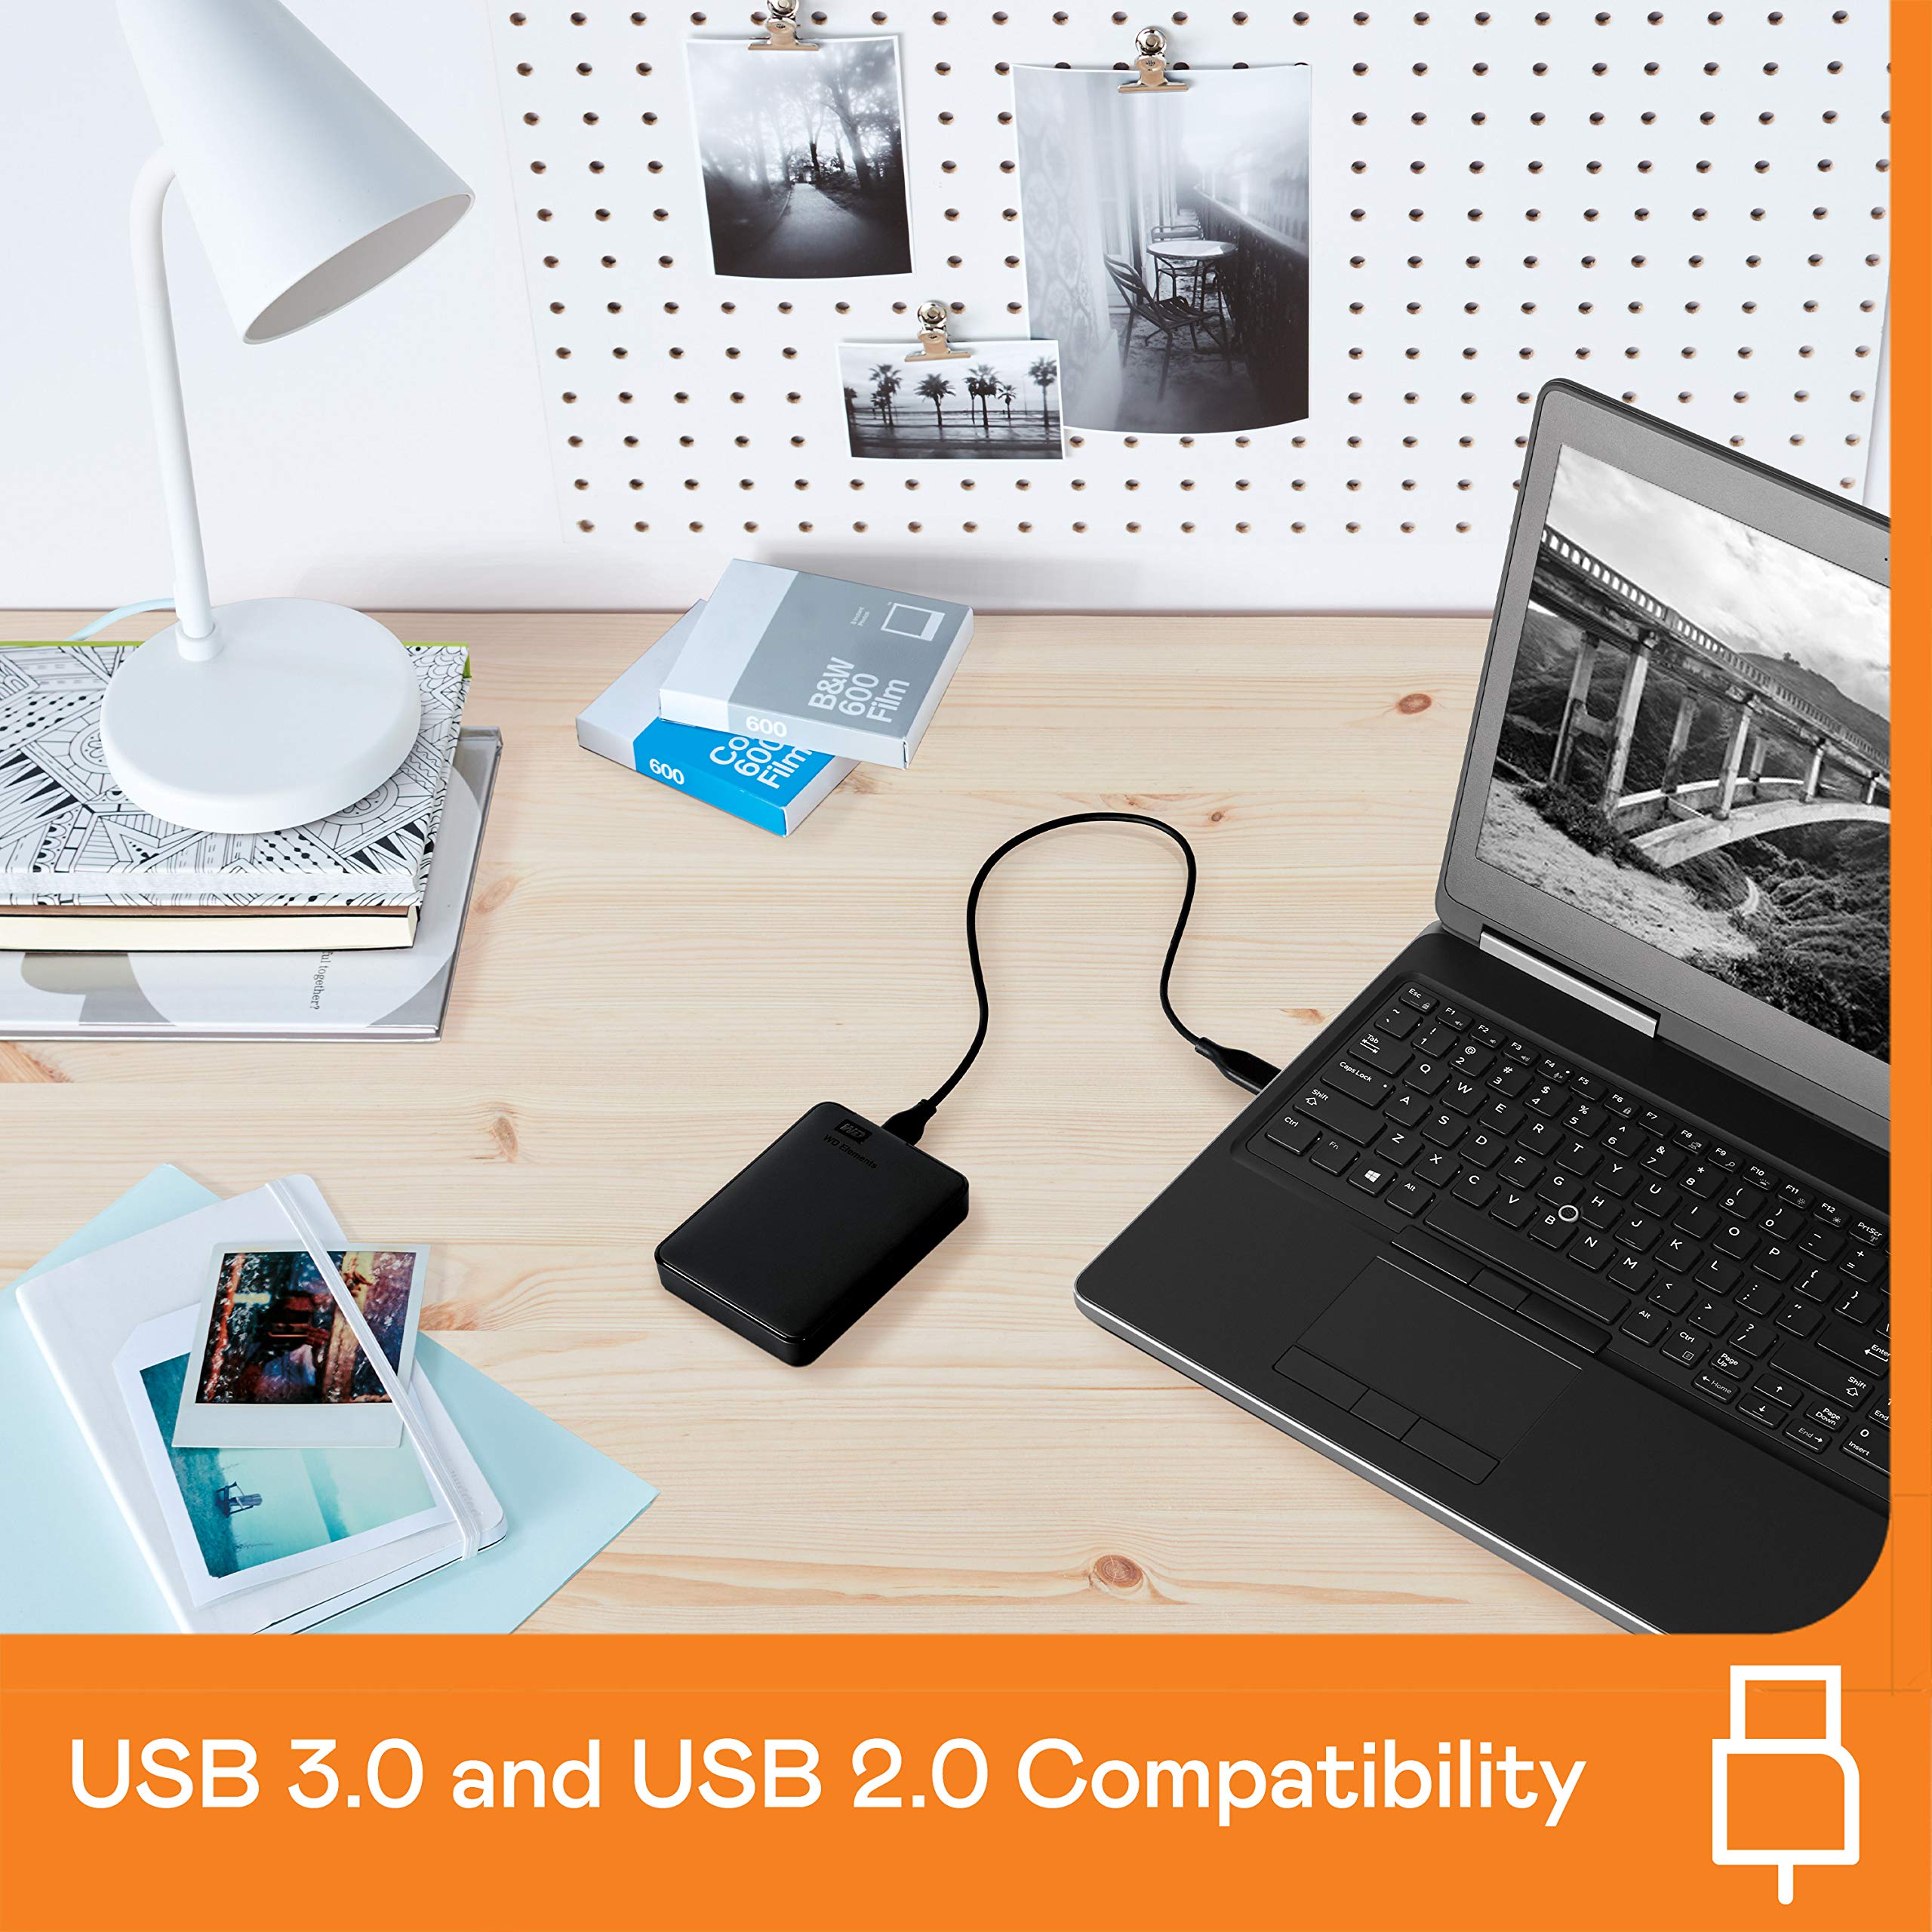 2tb external hard drive mac and pc compatible